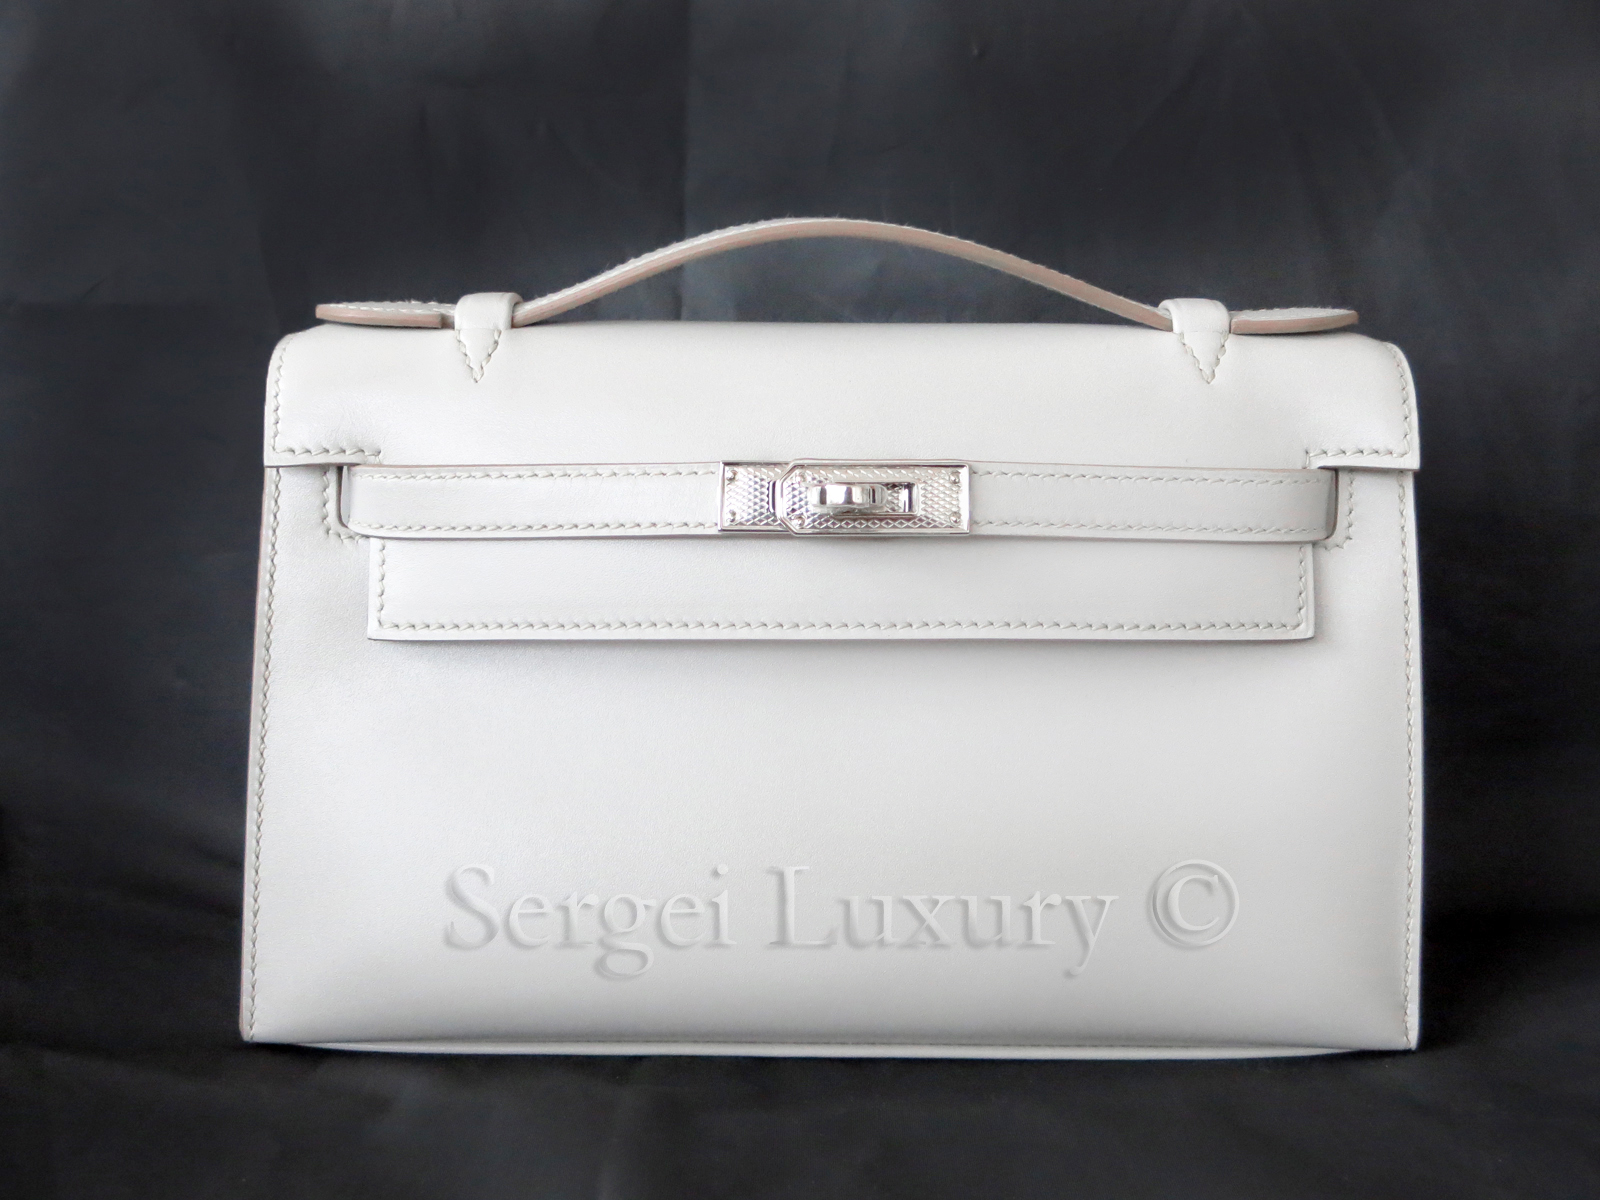 LIMITED Ed! New Authentic Hermes Gris Perle Kelly Guilloche